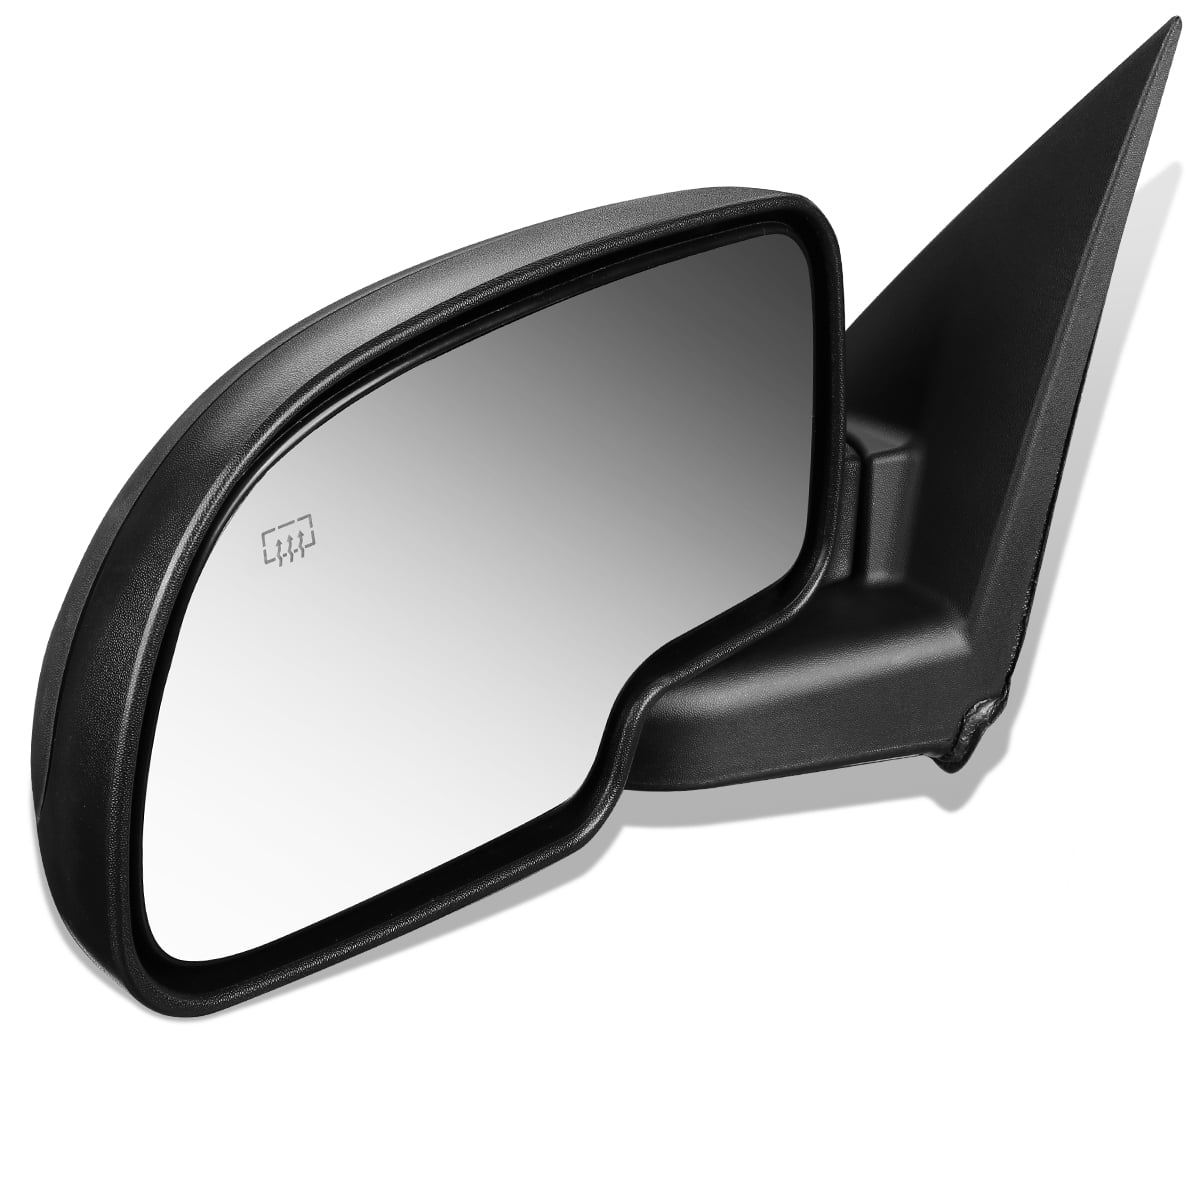 For 2003 to 2006 Chevy Avalancha 1500 2500 Silverado 3500 OE Style Powered+Heated Driver / Left 2006 Chevy Silverado 1500 Driver Side Mirror